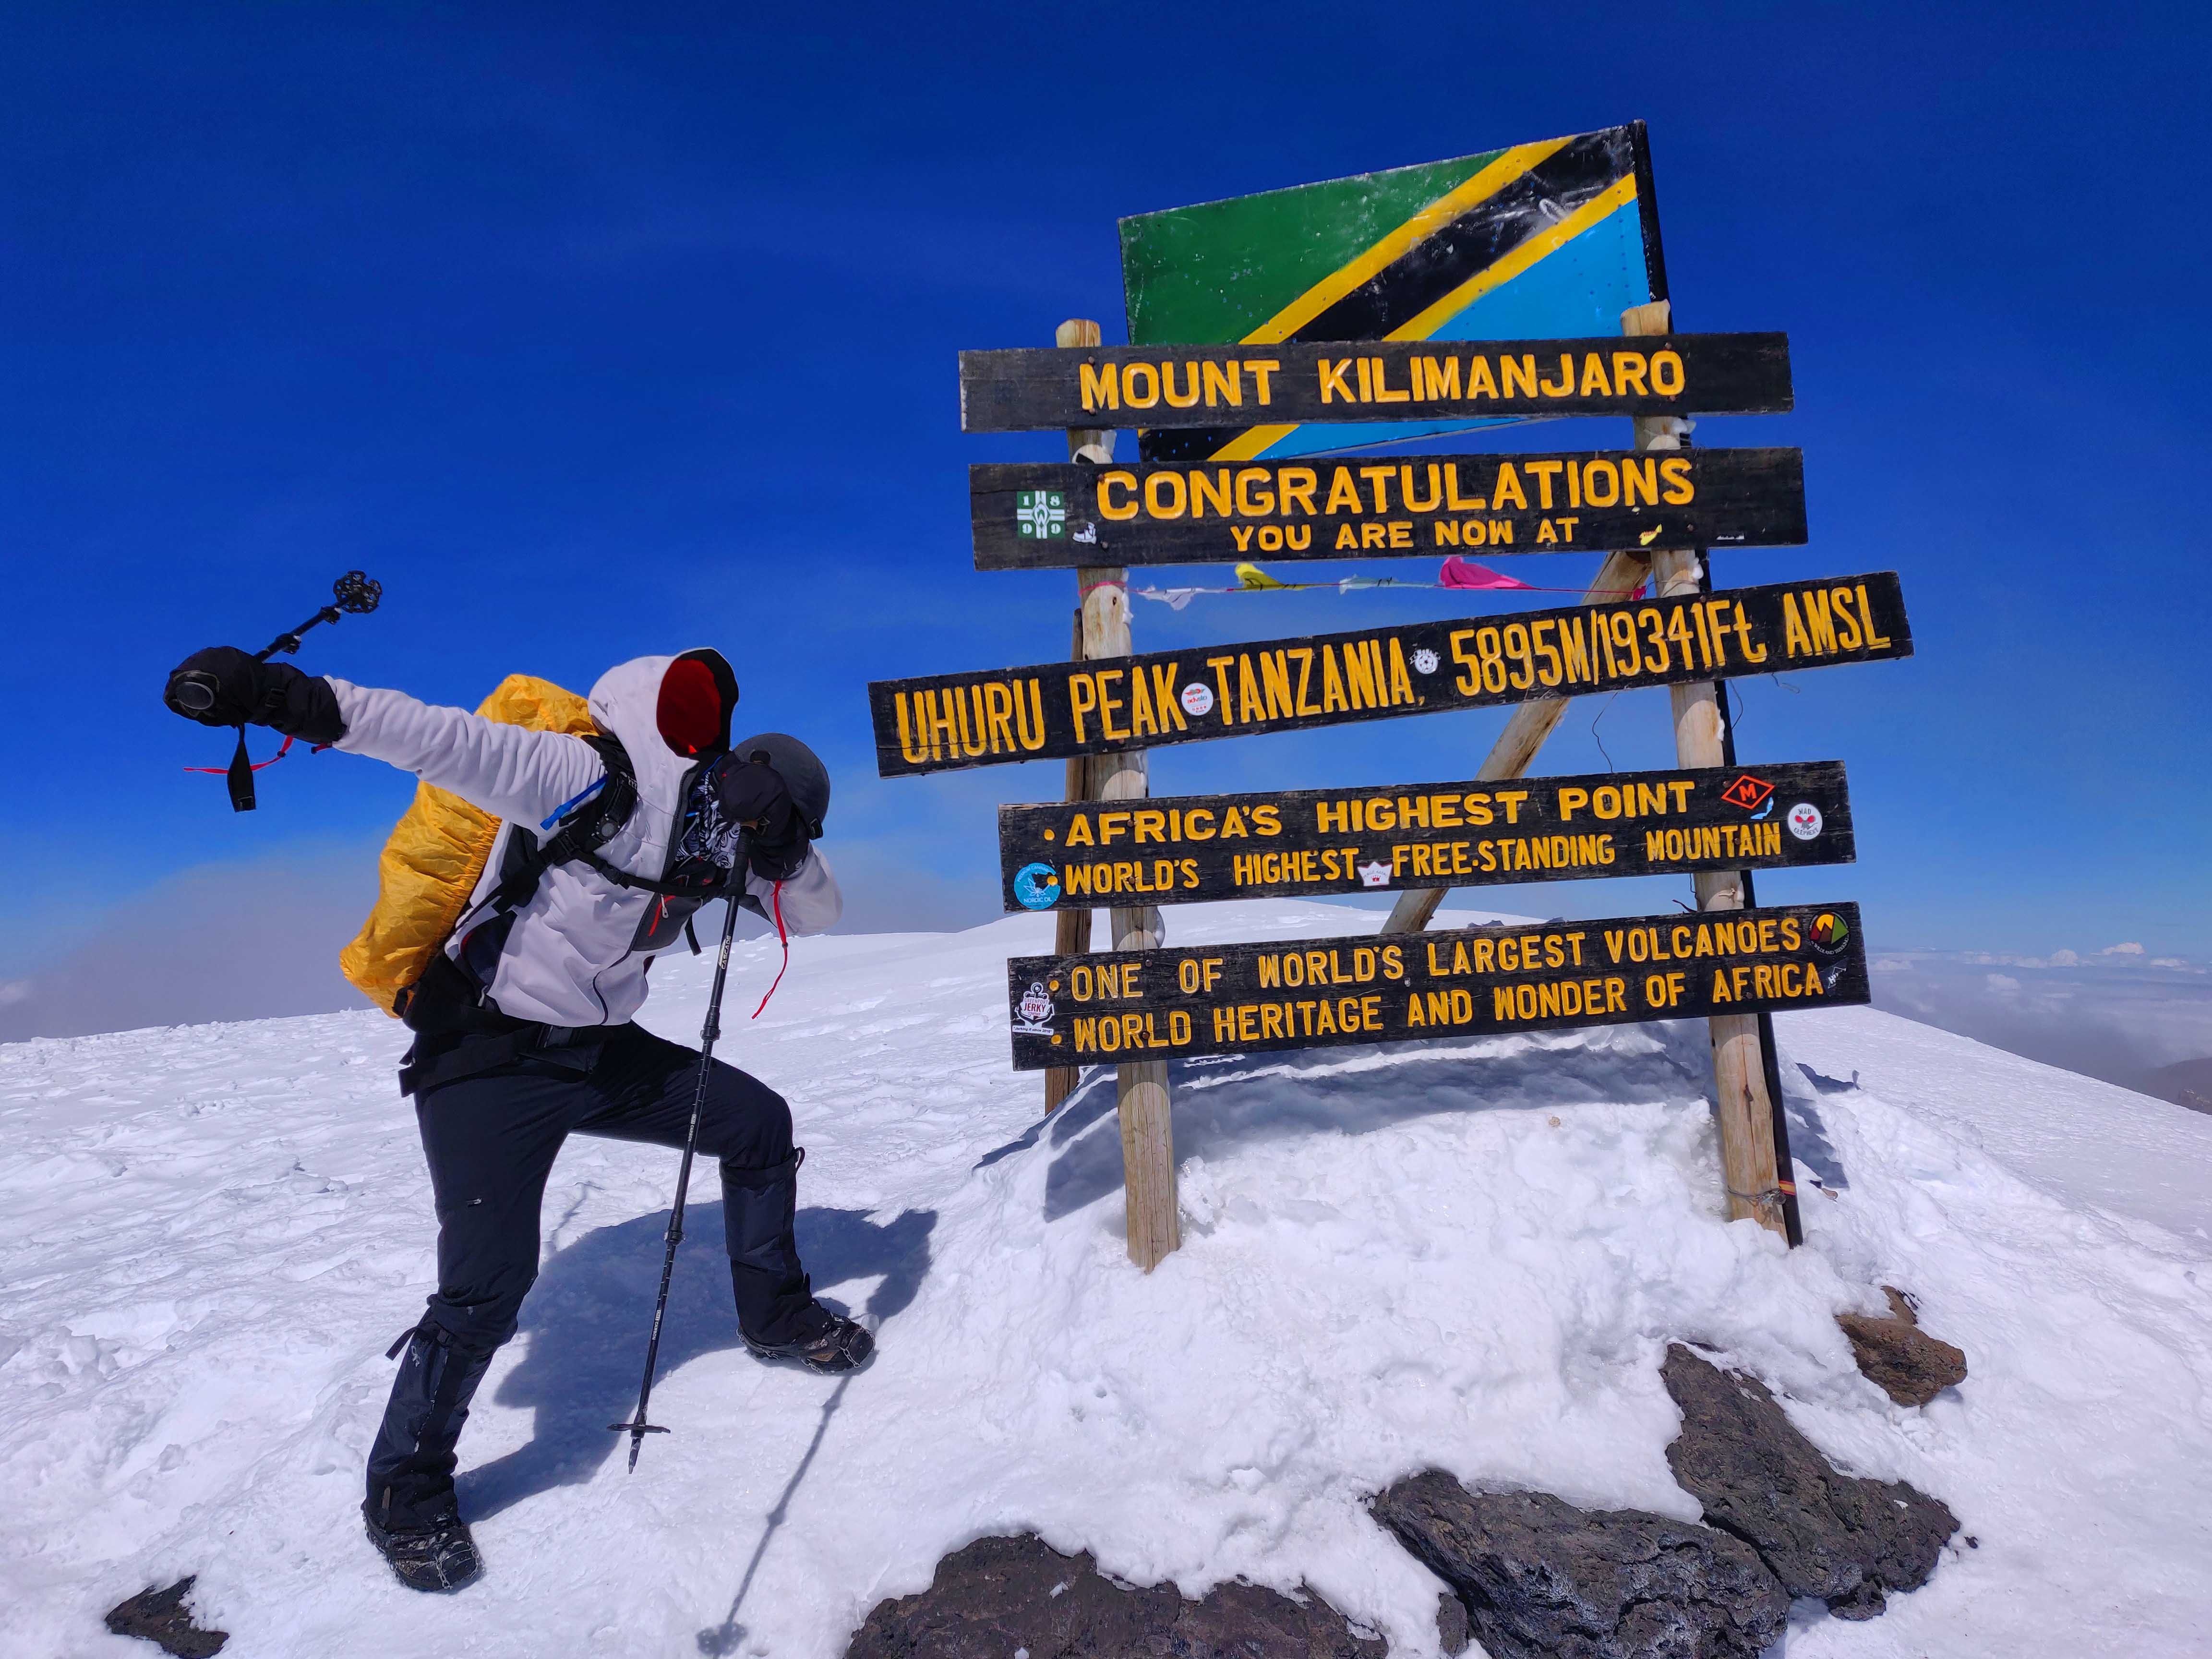 Barafu Camp (4,600m) to The Summit (5,896 m) and then to Mweka Camp (3,100 m)